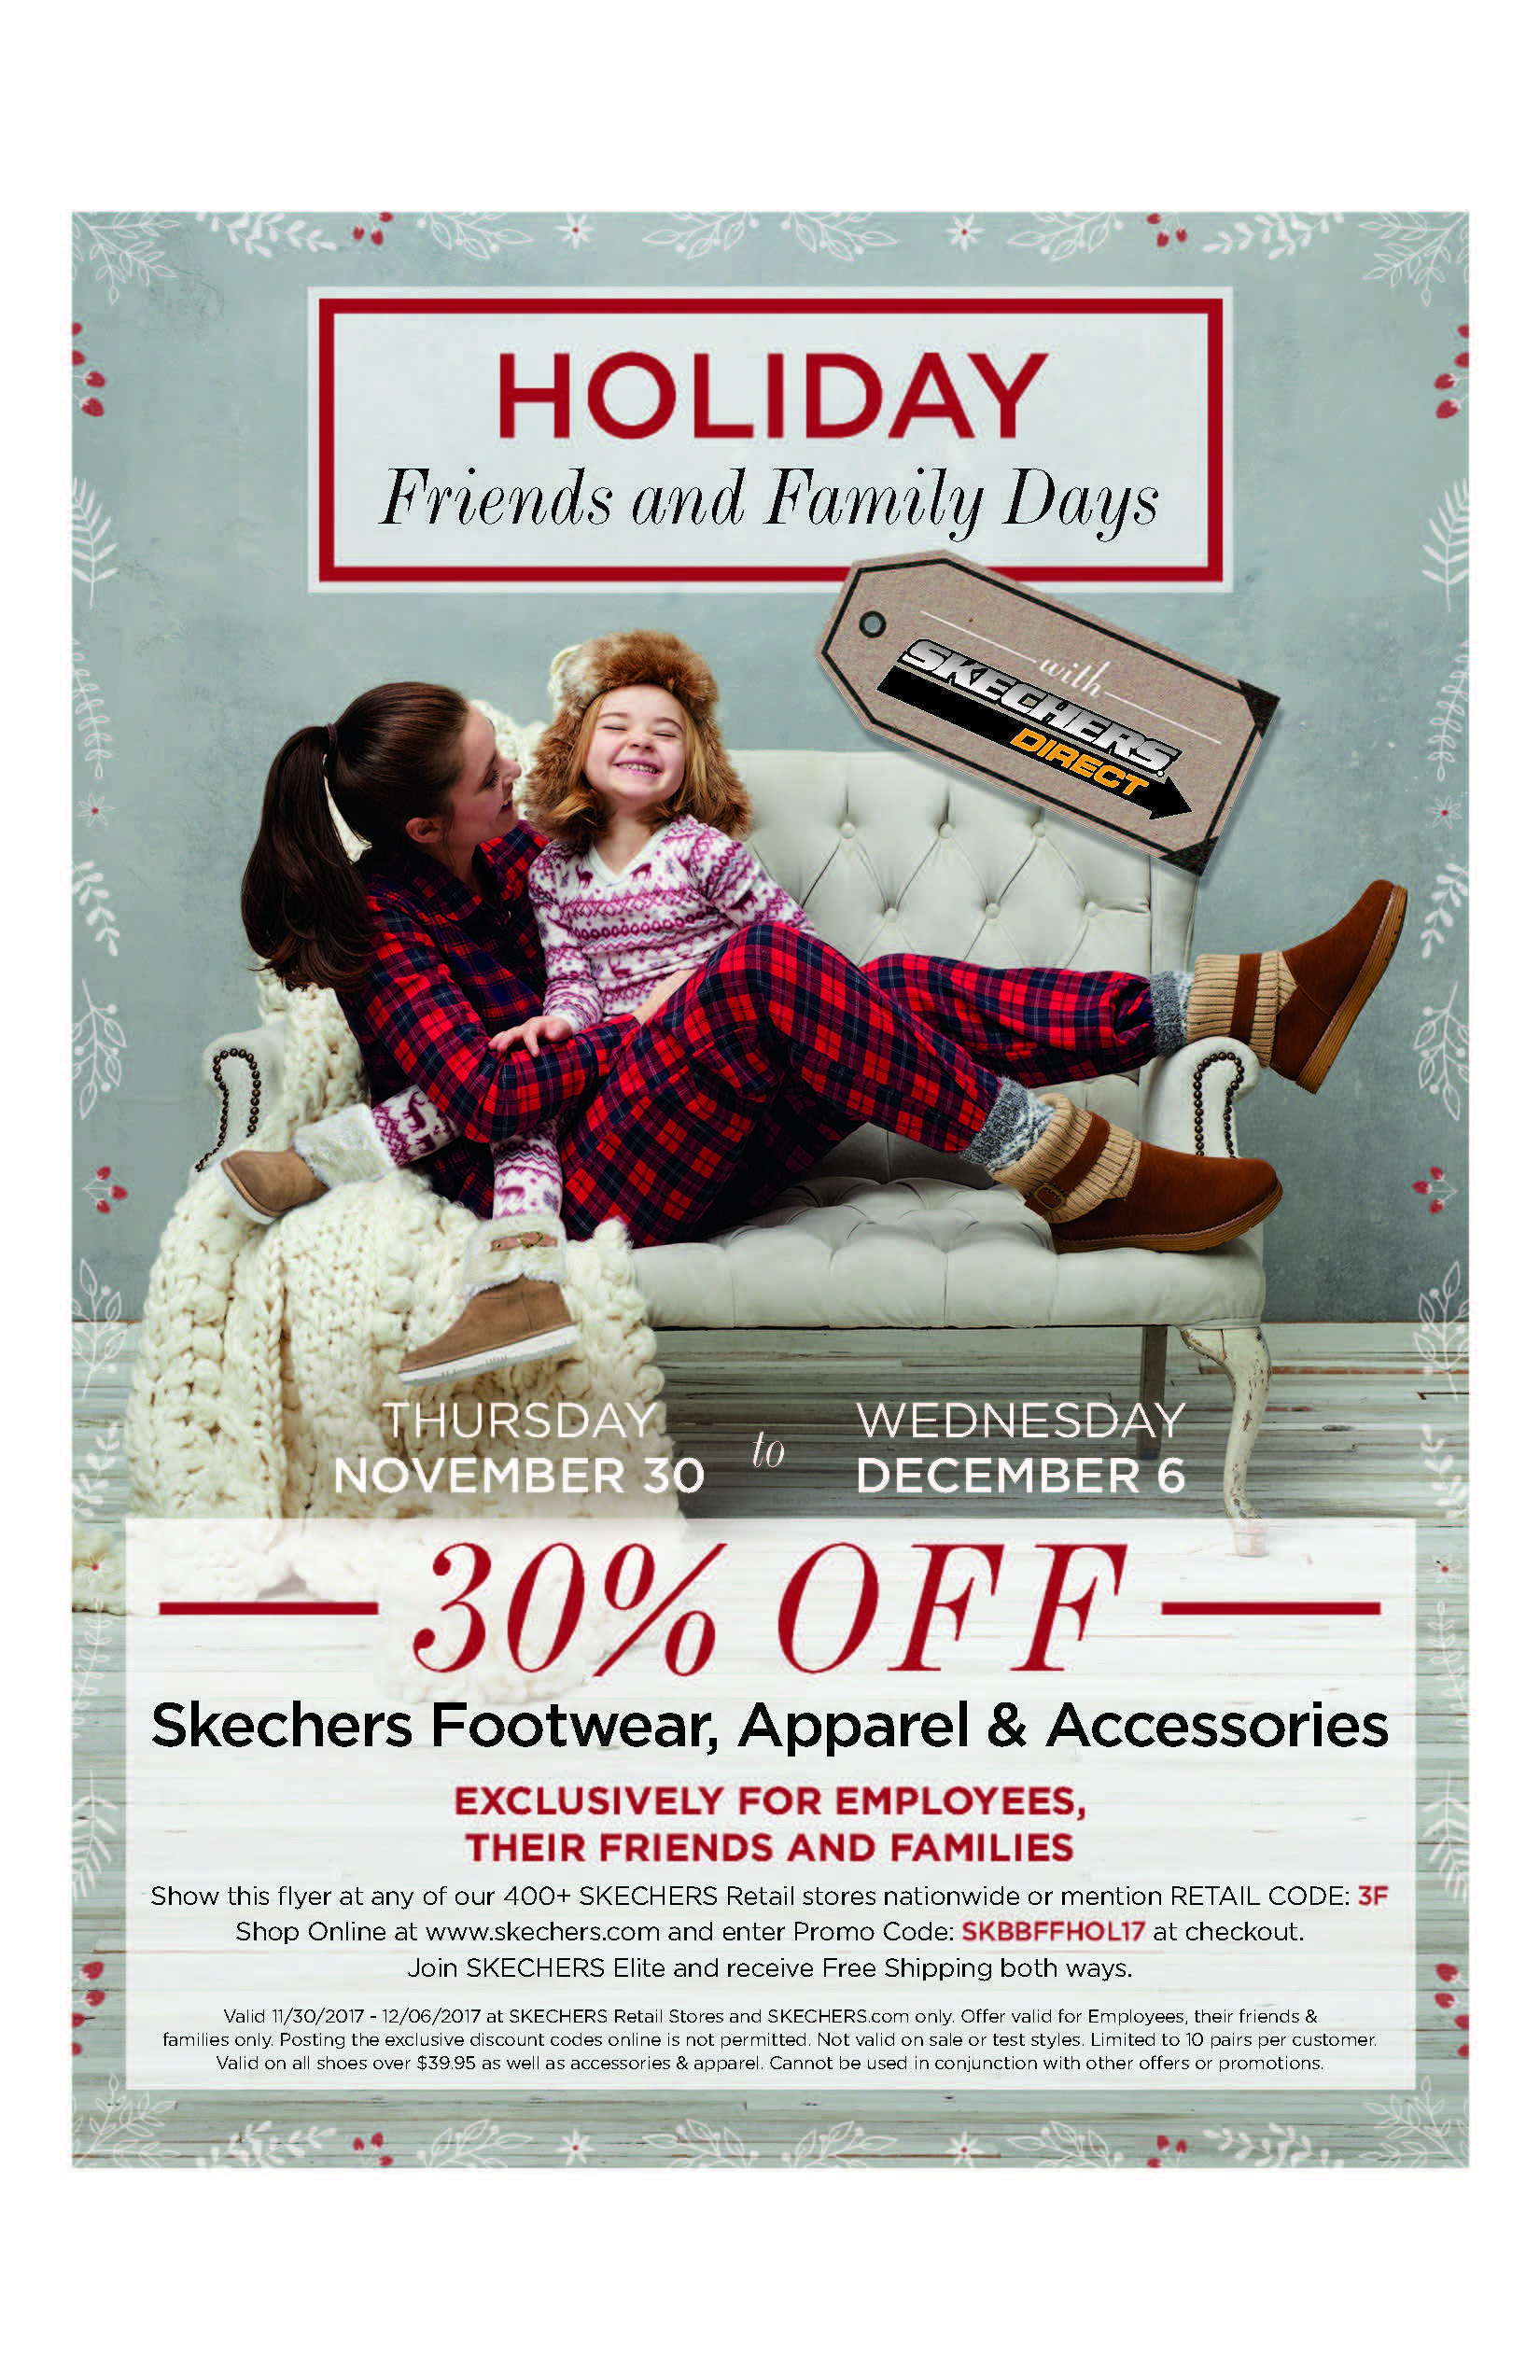 Skechers Holiday Promo! | Sport Clips Jobs